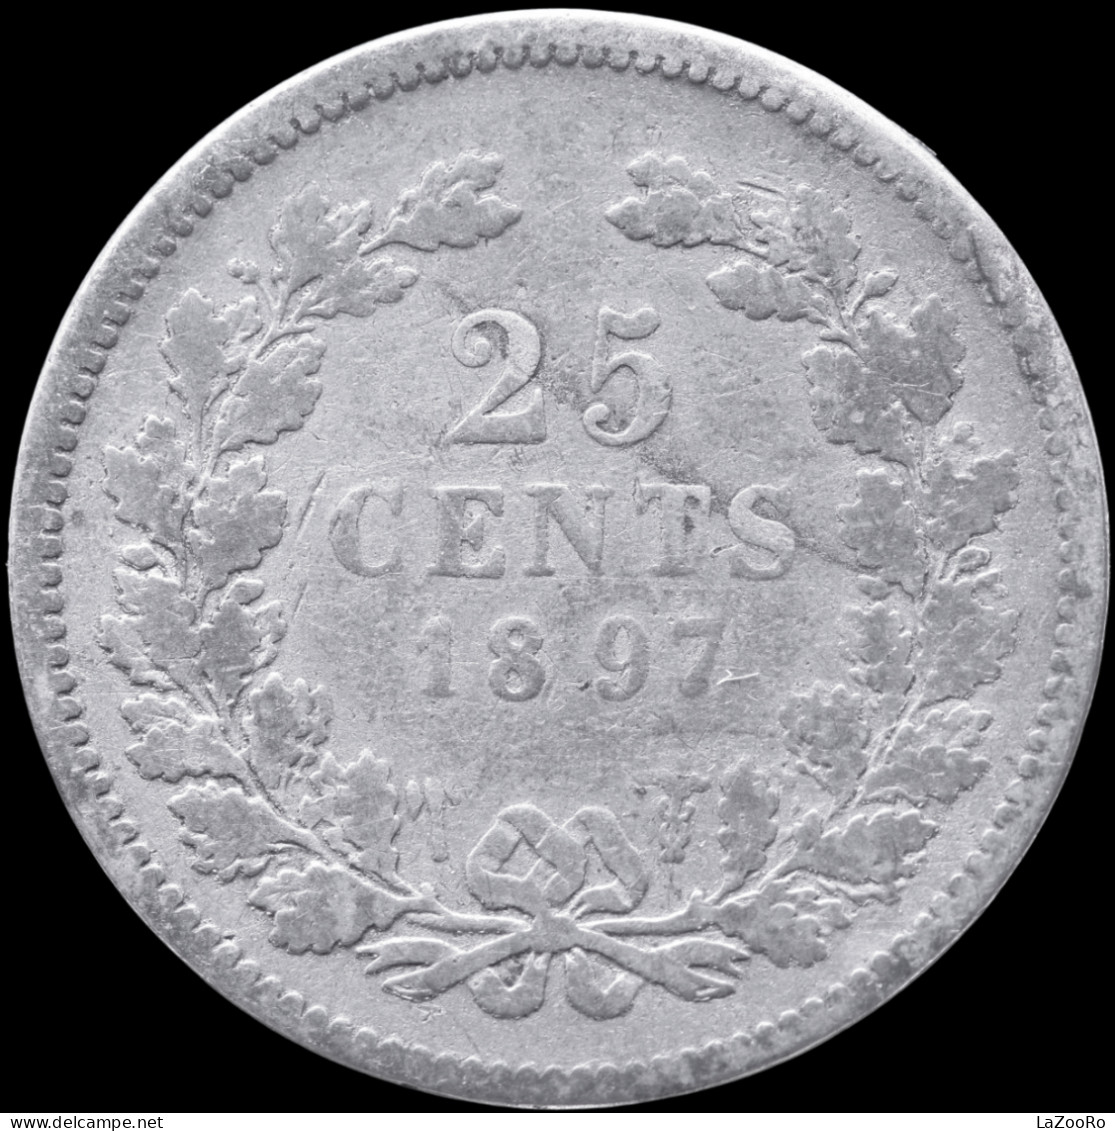 LaZooRo: Netherlands 25 Cents 1897 VF - Silver - 25 Cent